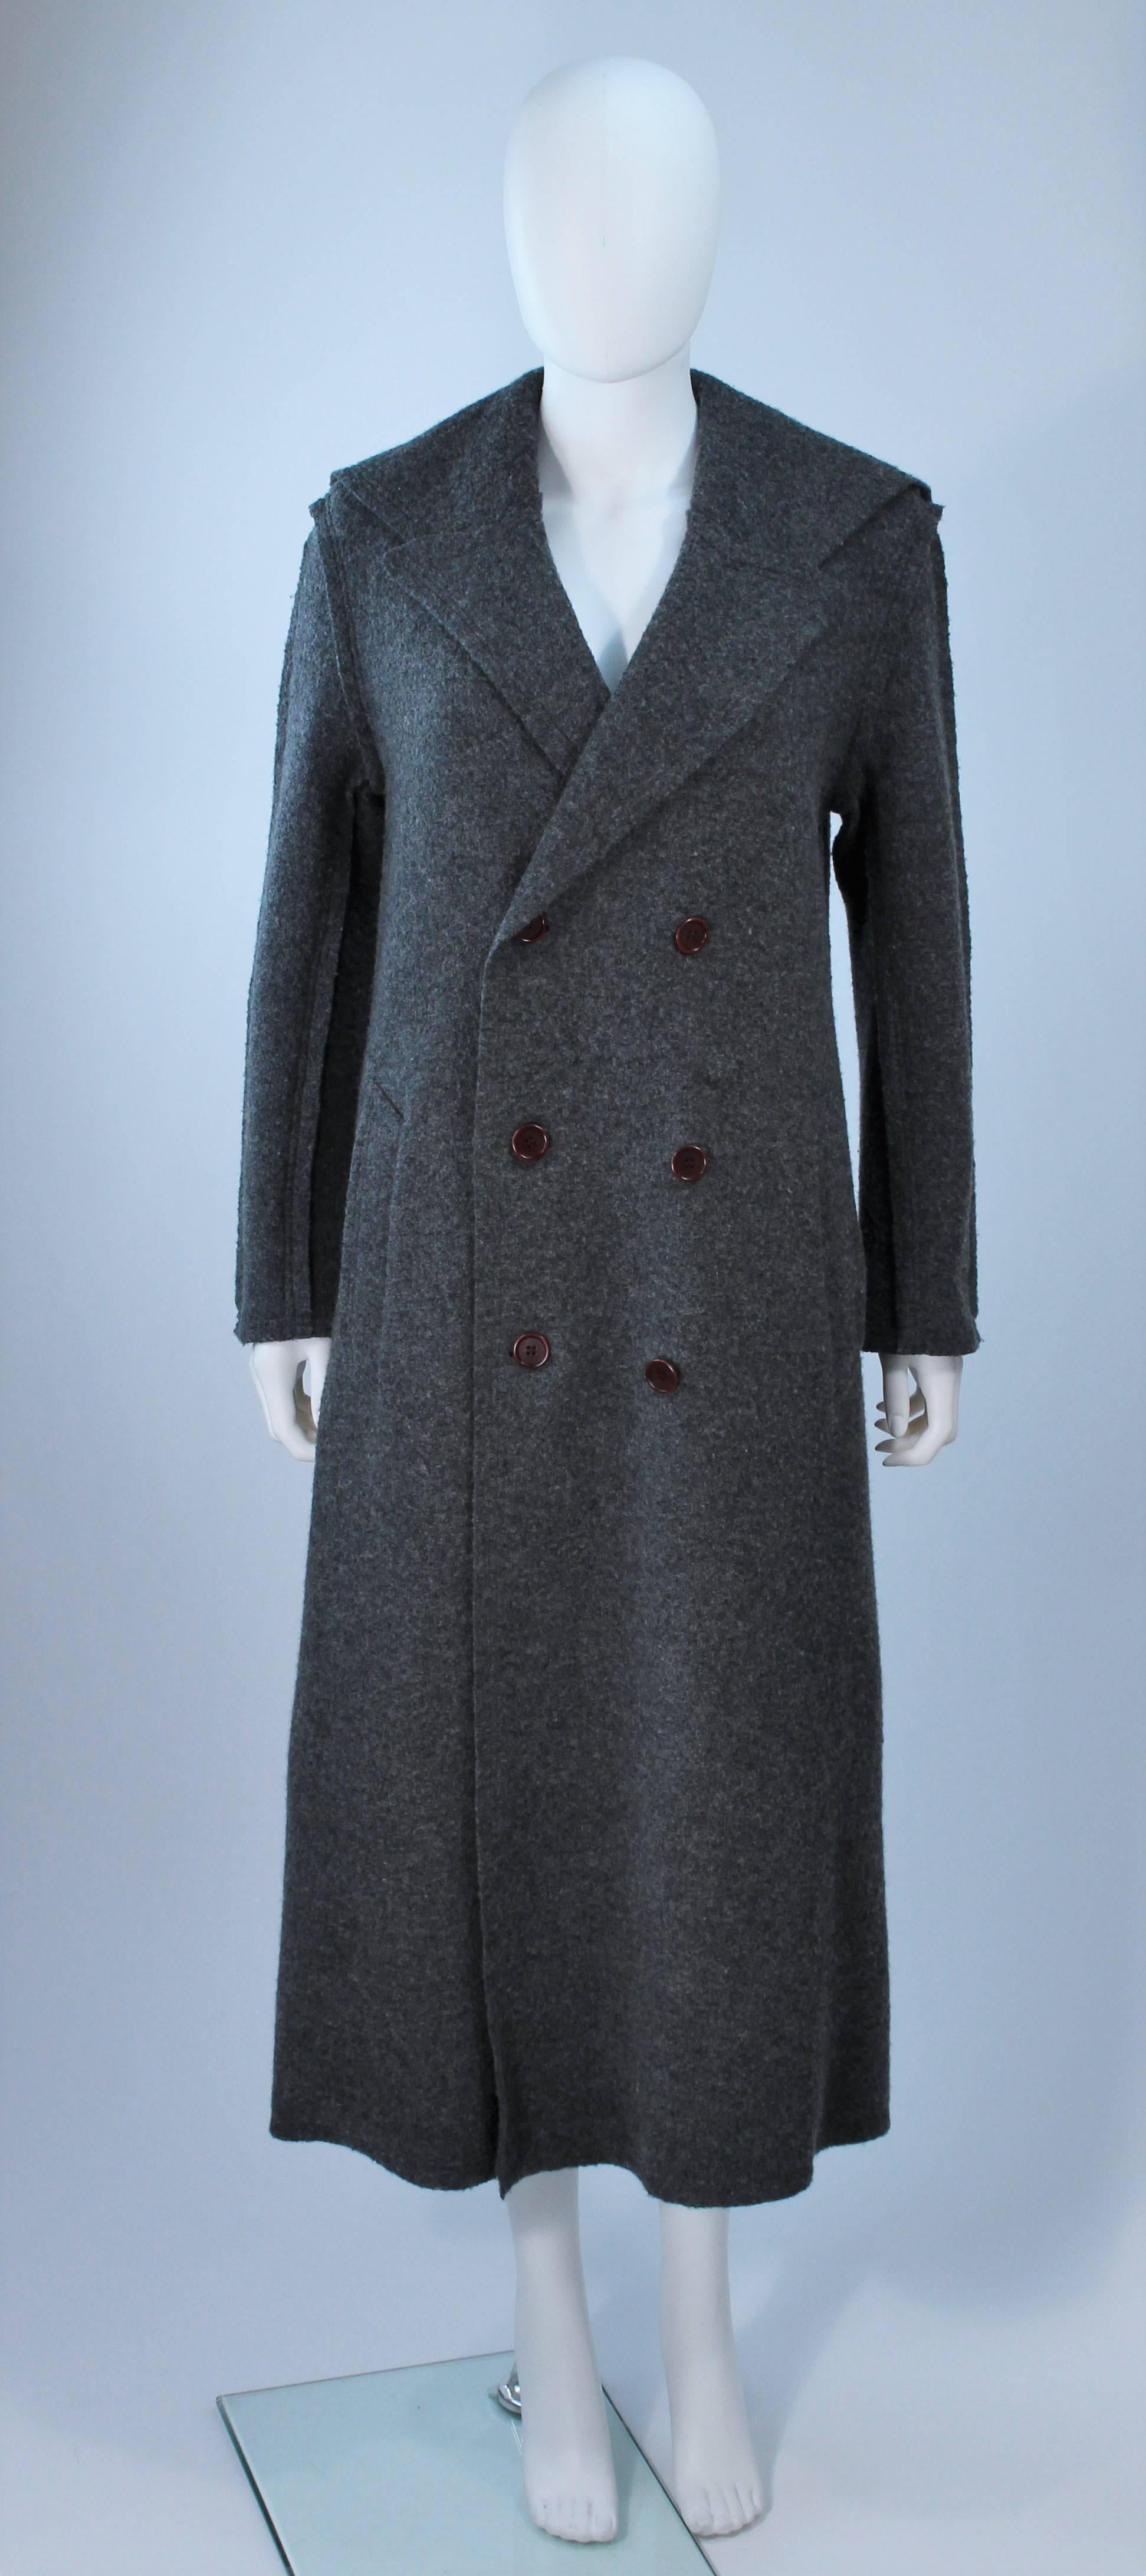  This Commes Des Garcon coat is composed of grey boiled wool. Features top stitching and center front button closures with side pockets. In excellent vintage condition. 

**Please cross-reference measurements for personal accuracy. 

Measures